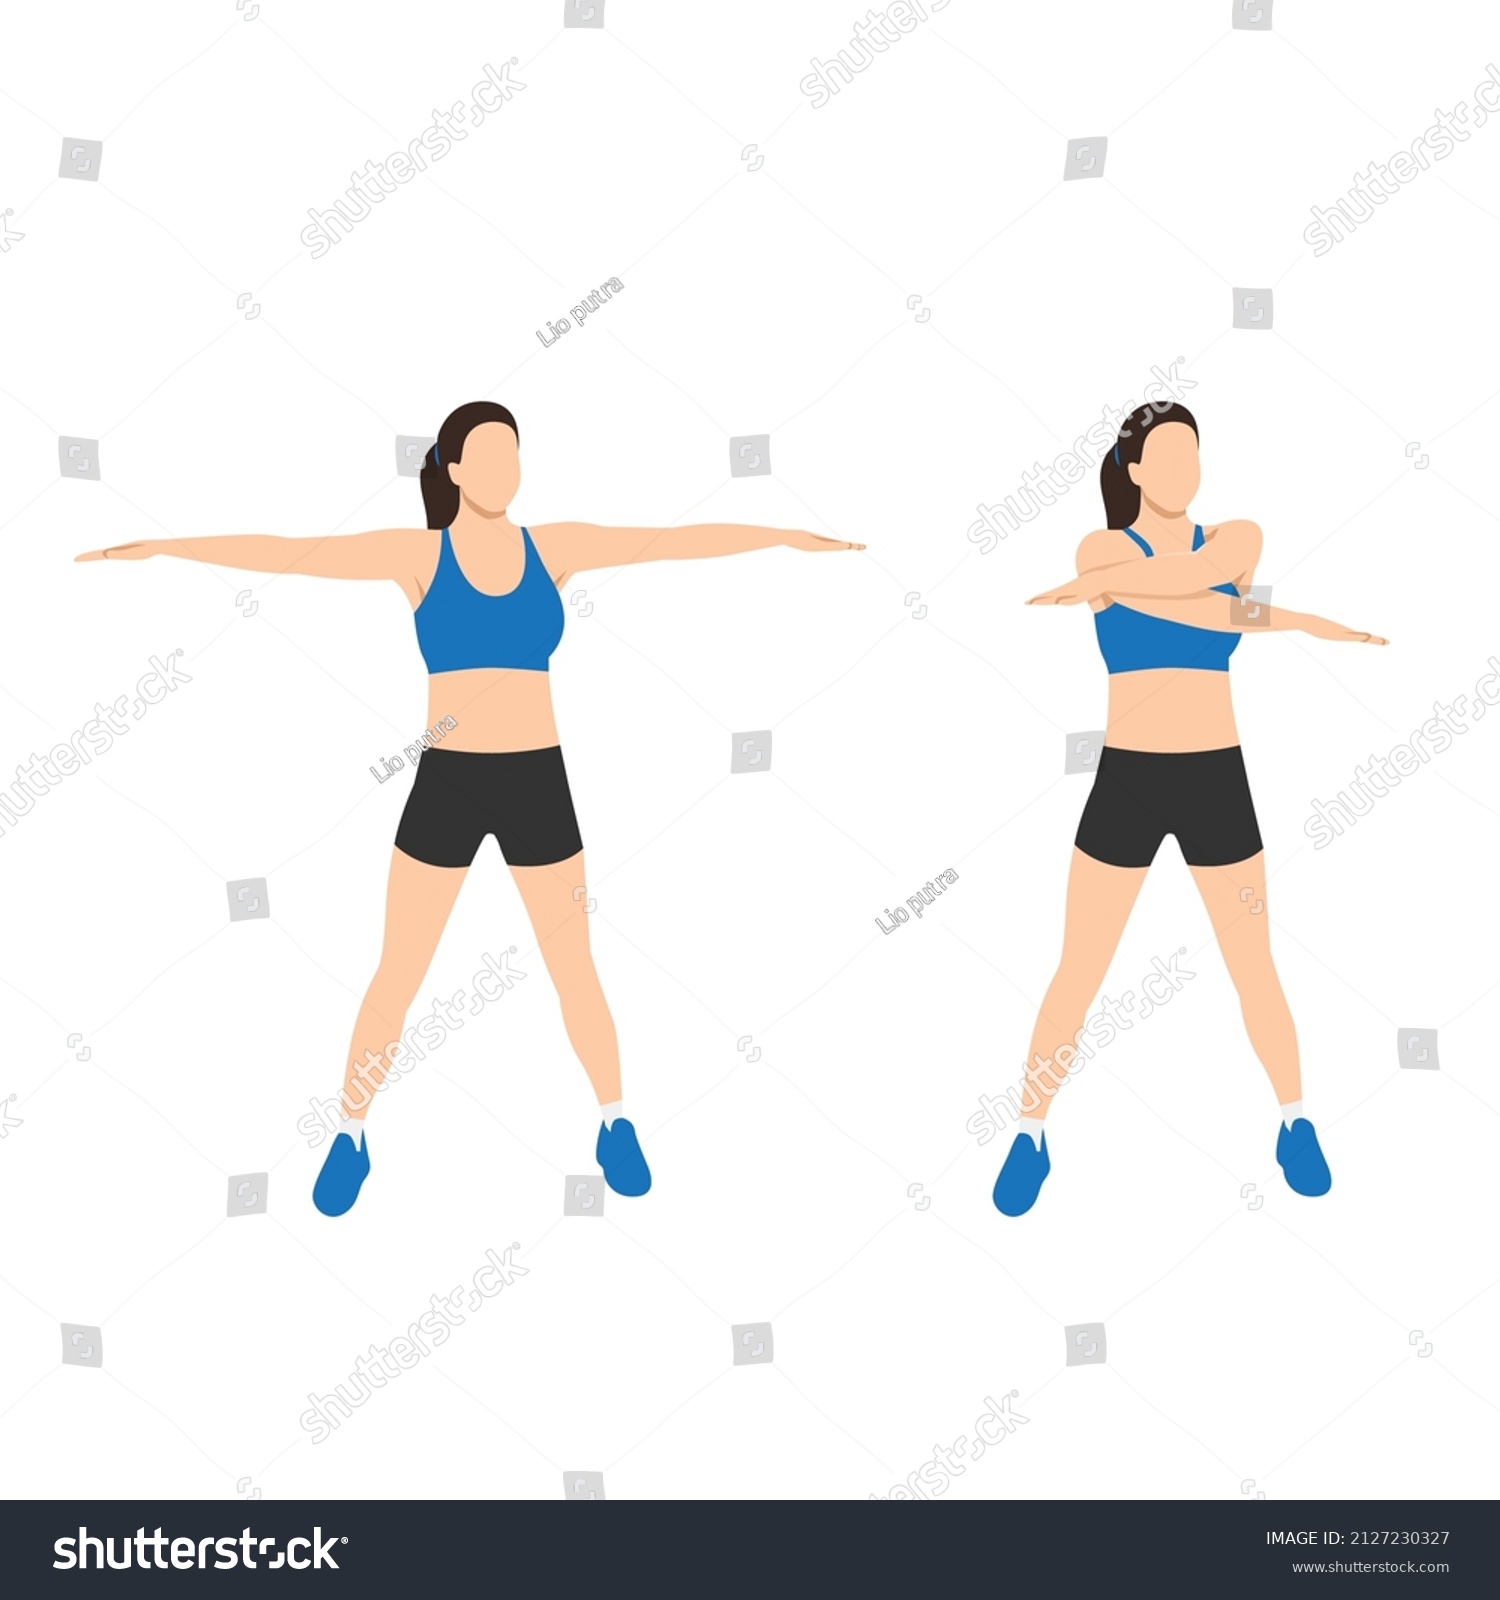 Woman Doing Arm Swings Exercise Flat Stock Vector (Royalty Free) 2127230327